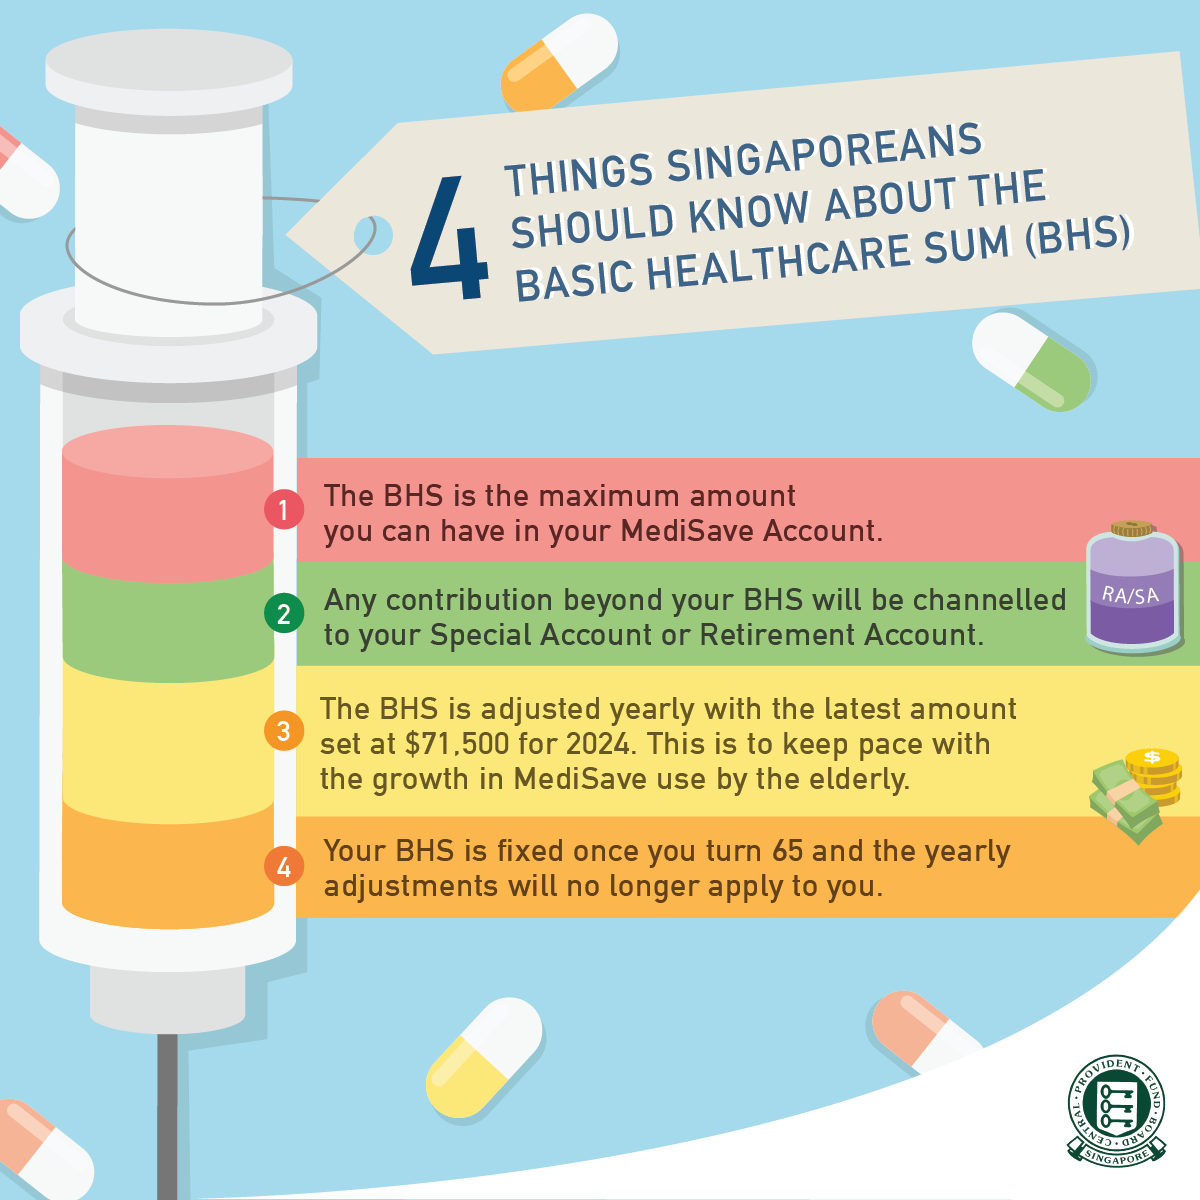 4 things Singaporeans should know about the Basic Healthcare Sum